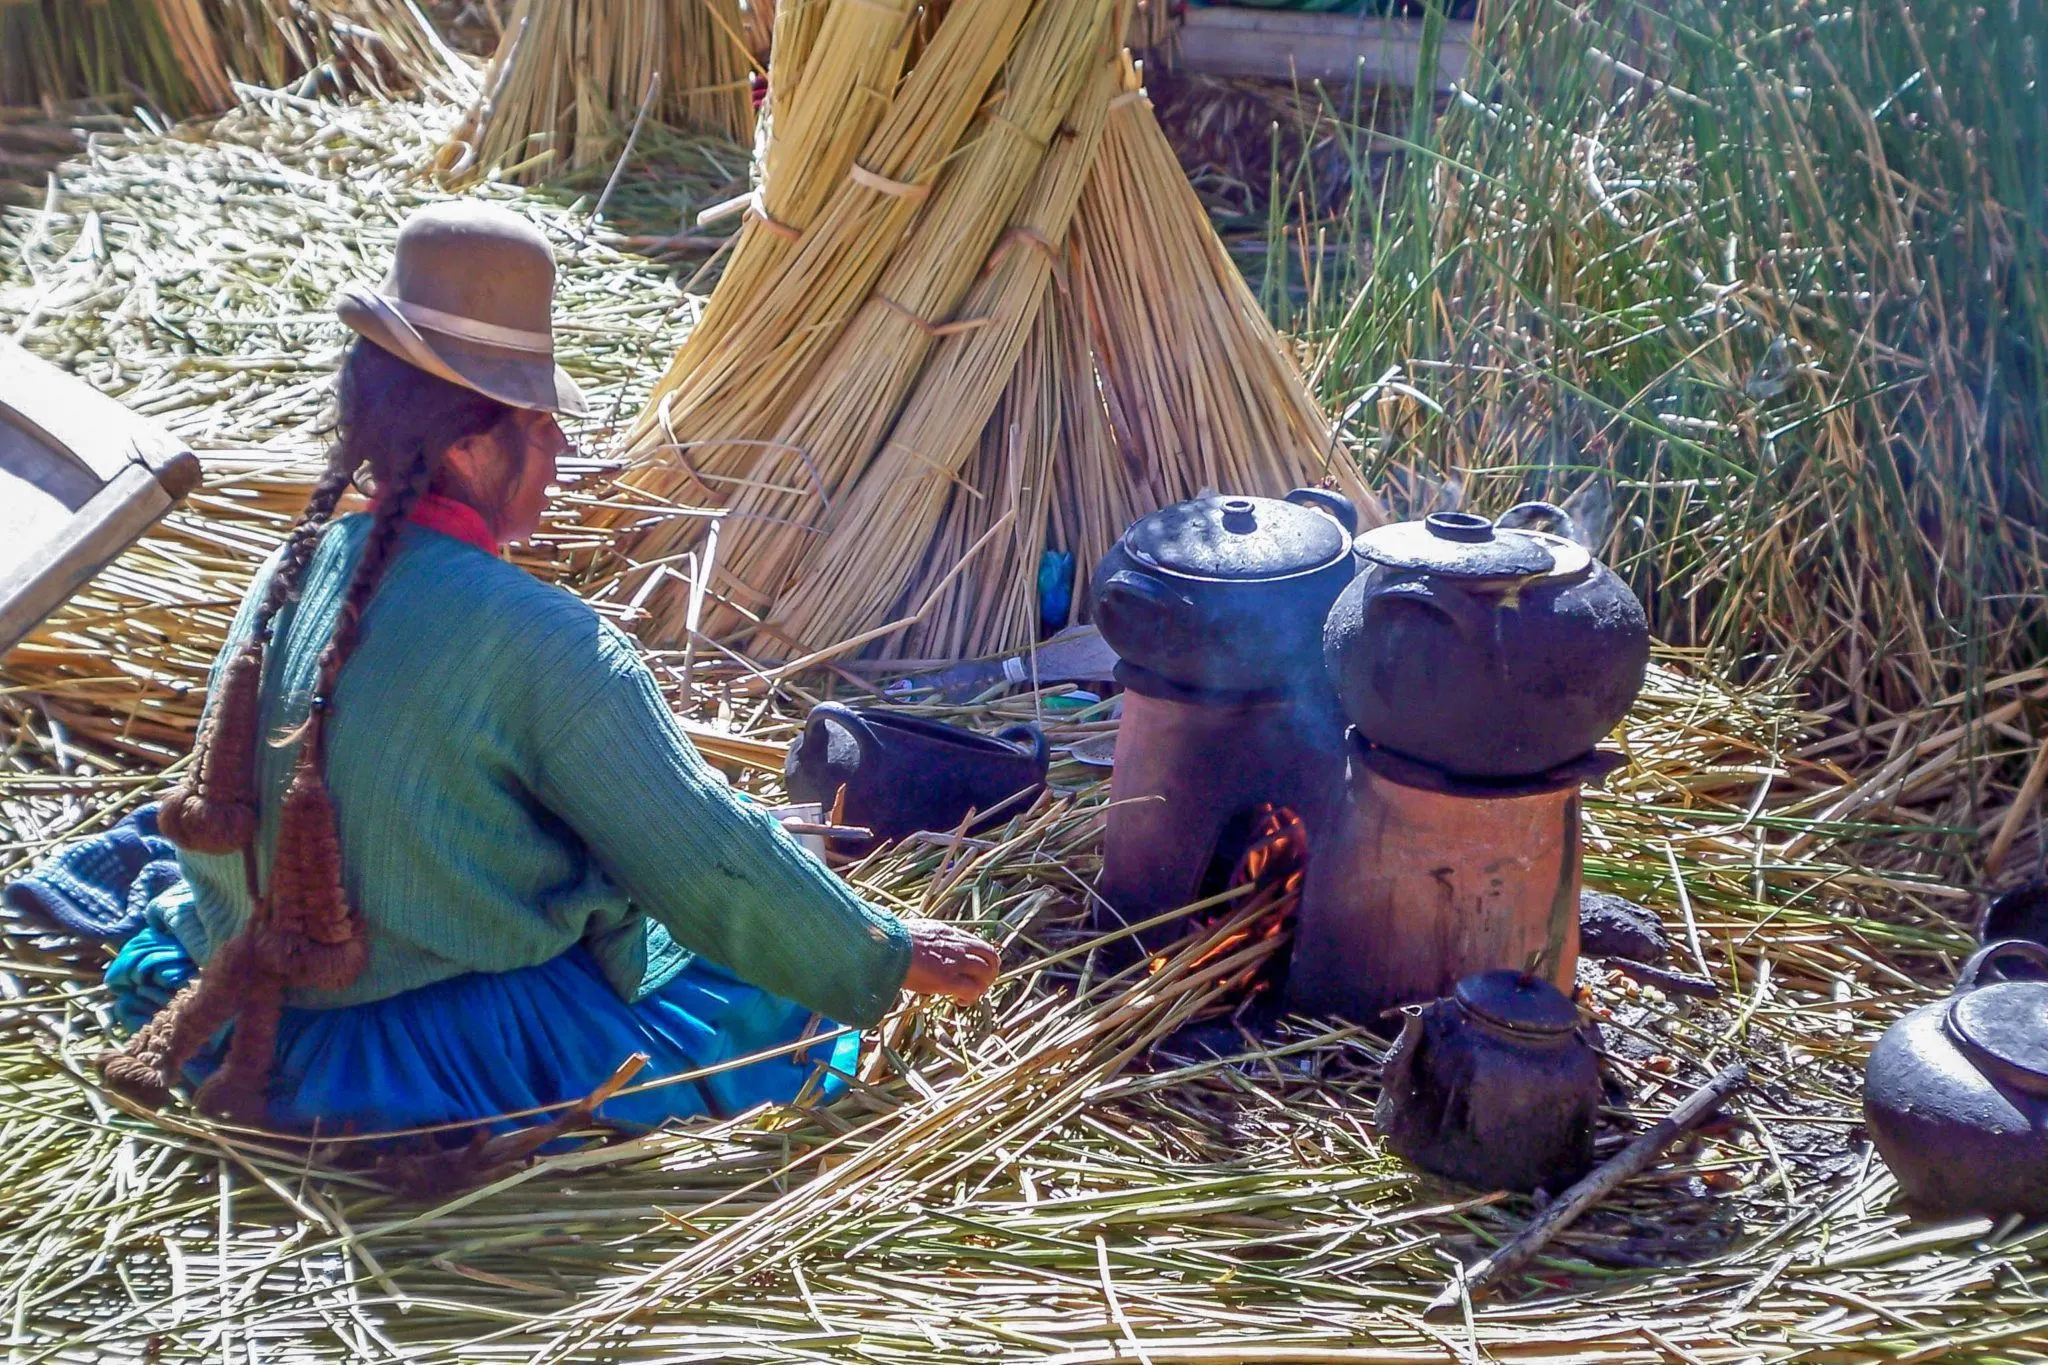 A women tending a cooking fire on the Uros Islands in Peru